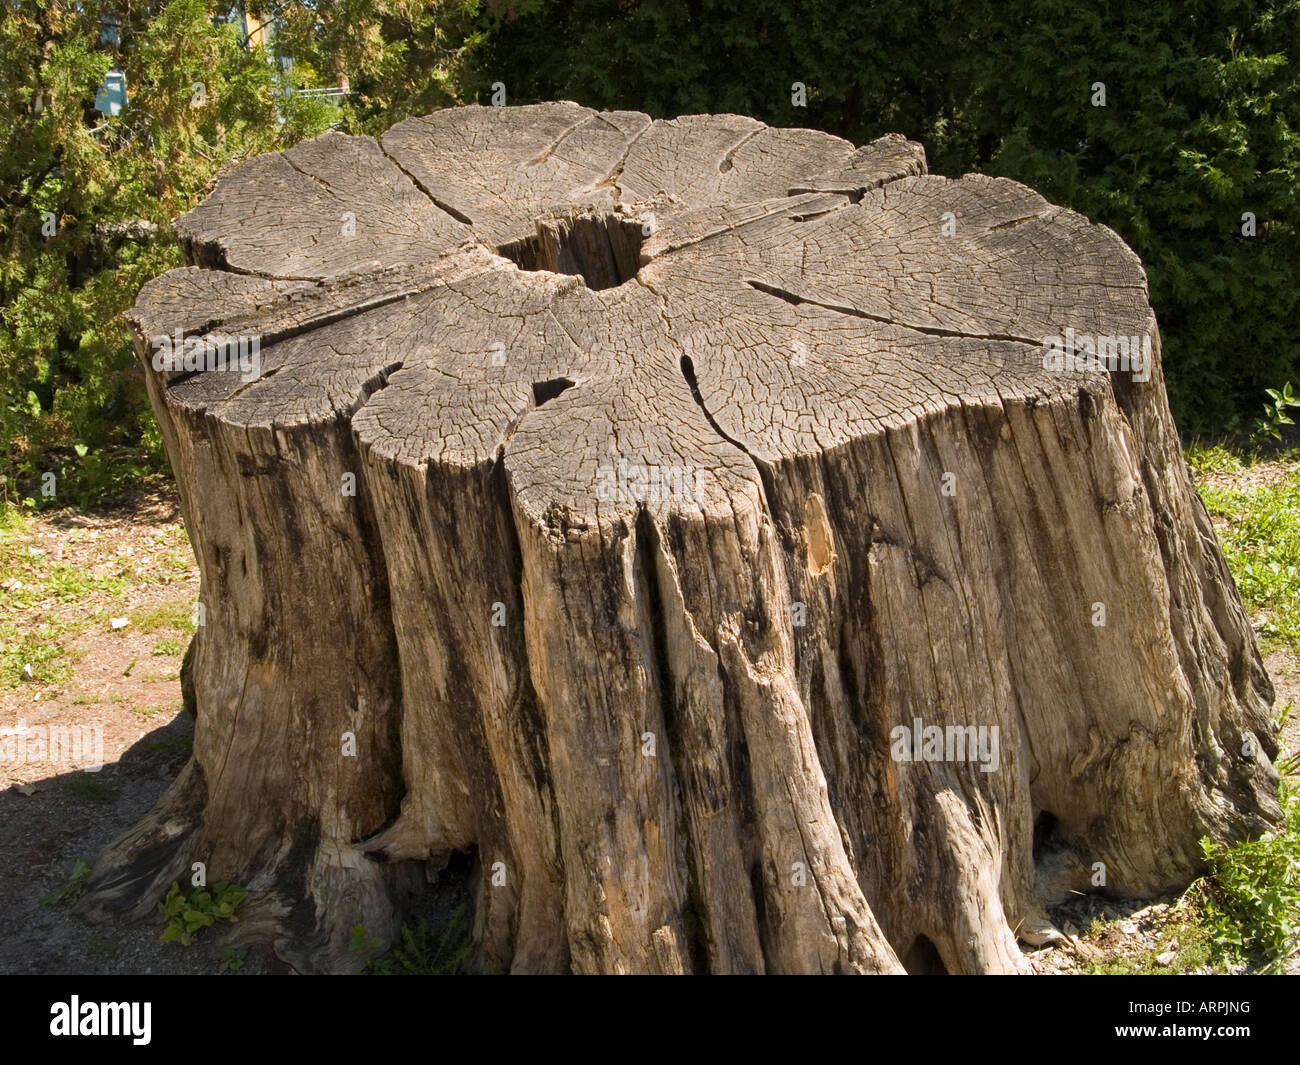 A giant tree stump in the Tree House garden at the Jardin Botanique de Montreal, Quebec Canada Stock Photo